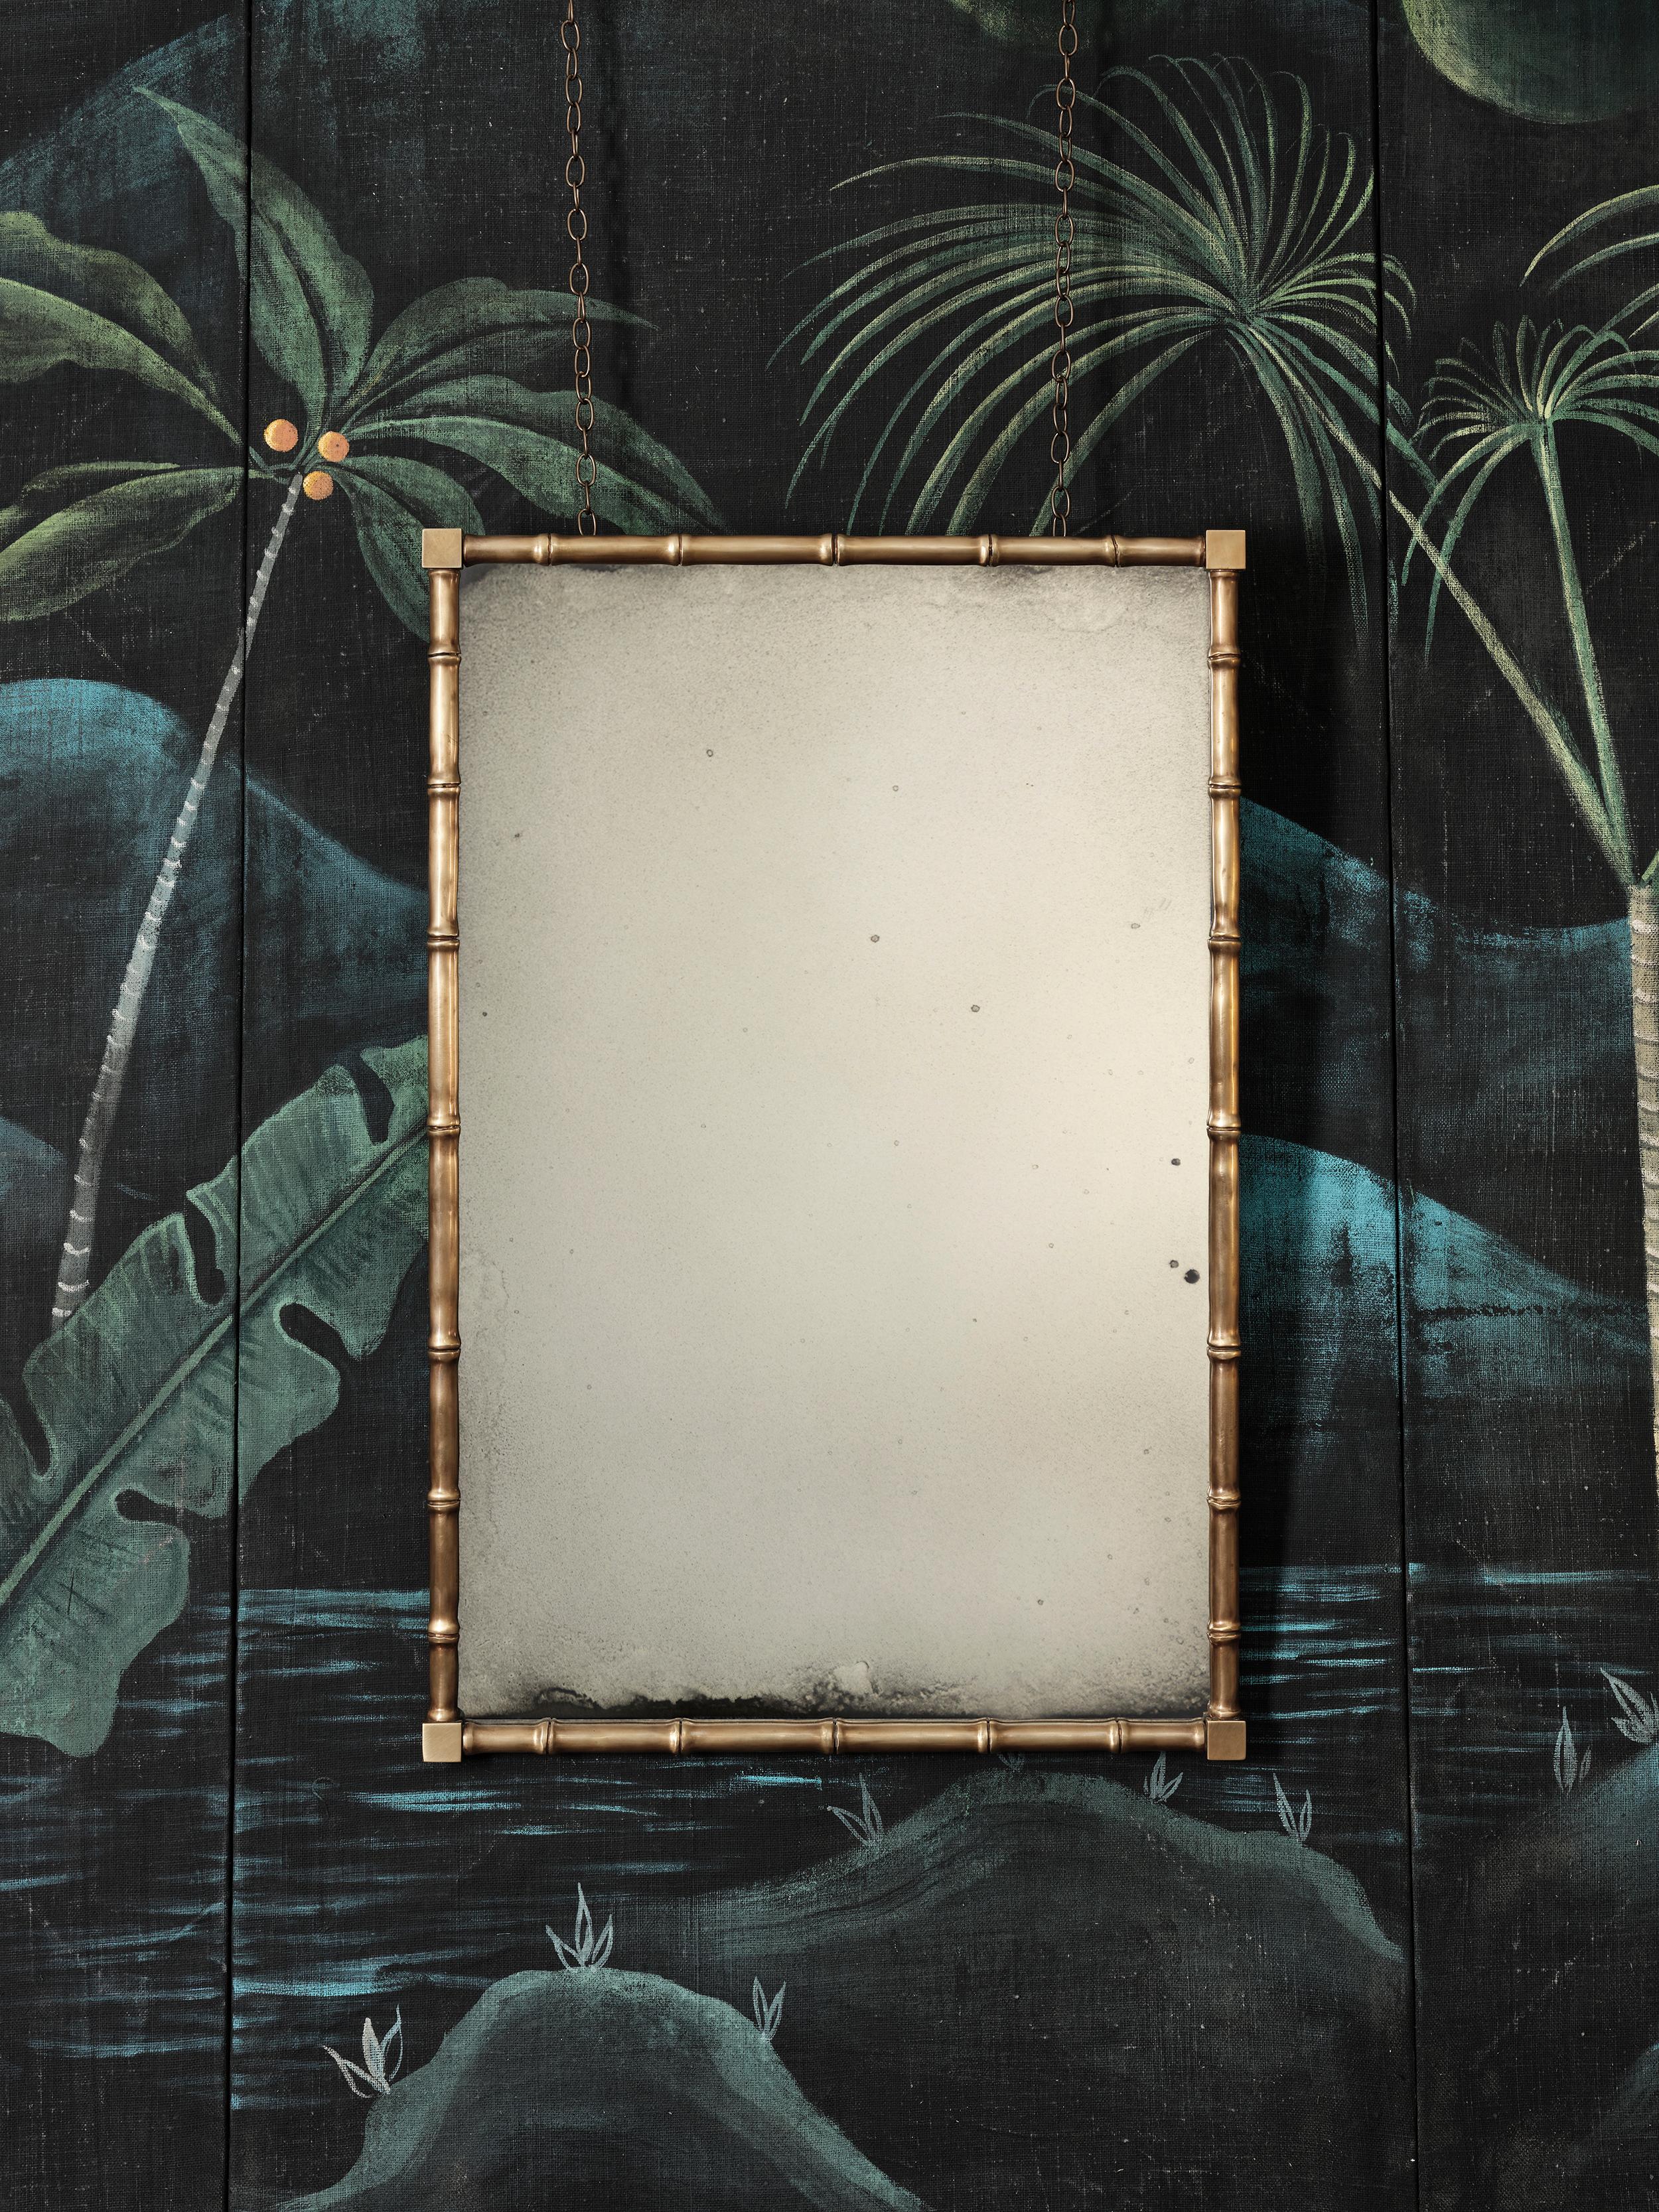 Made in our Shropshire workshops, our Bamboo Mirror features a hand sculpted solid brass frame that surrounds an antiqued mirror glass centre.
​
Available to view in our London showroom.